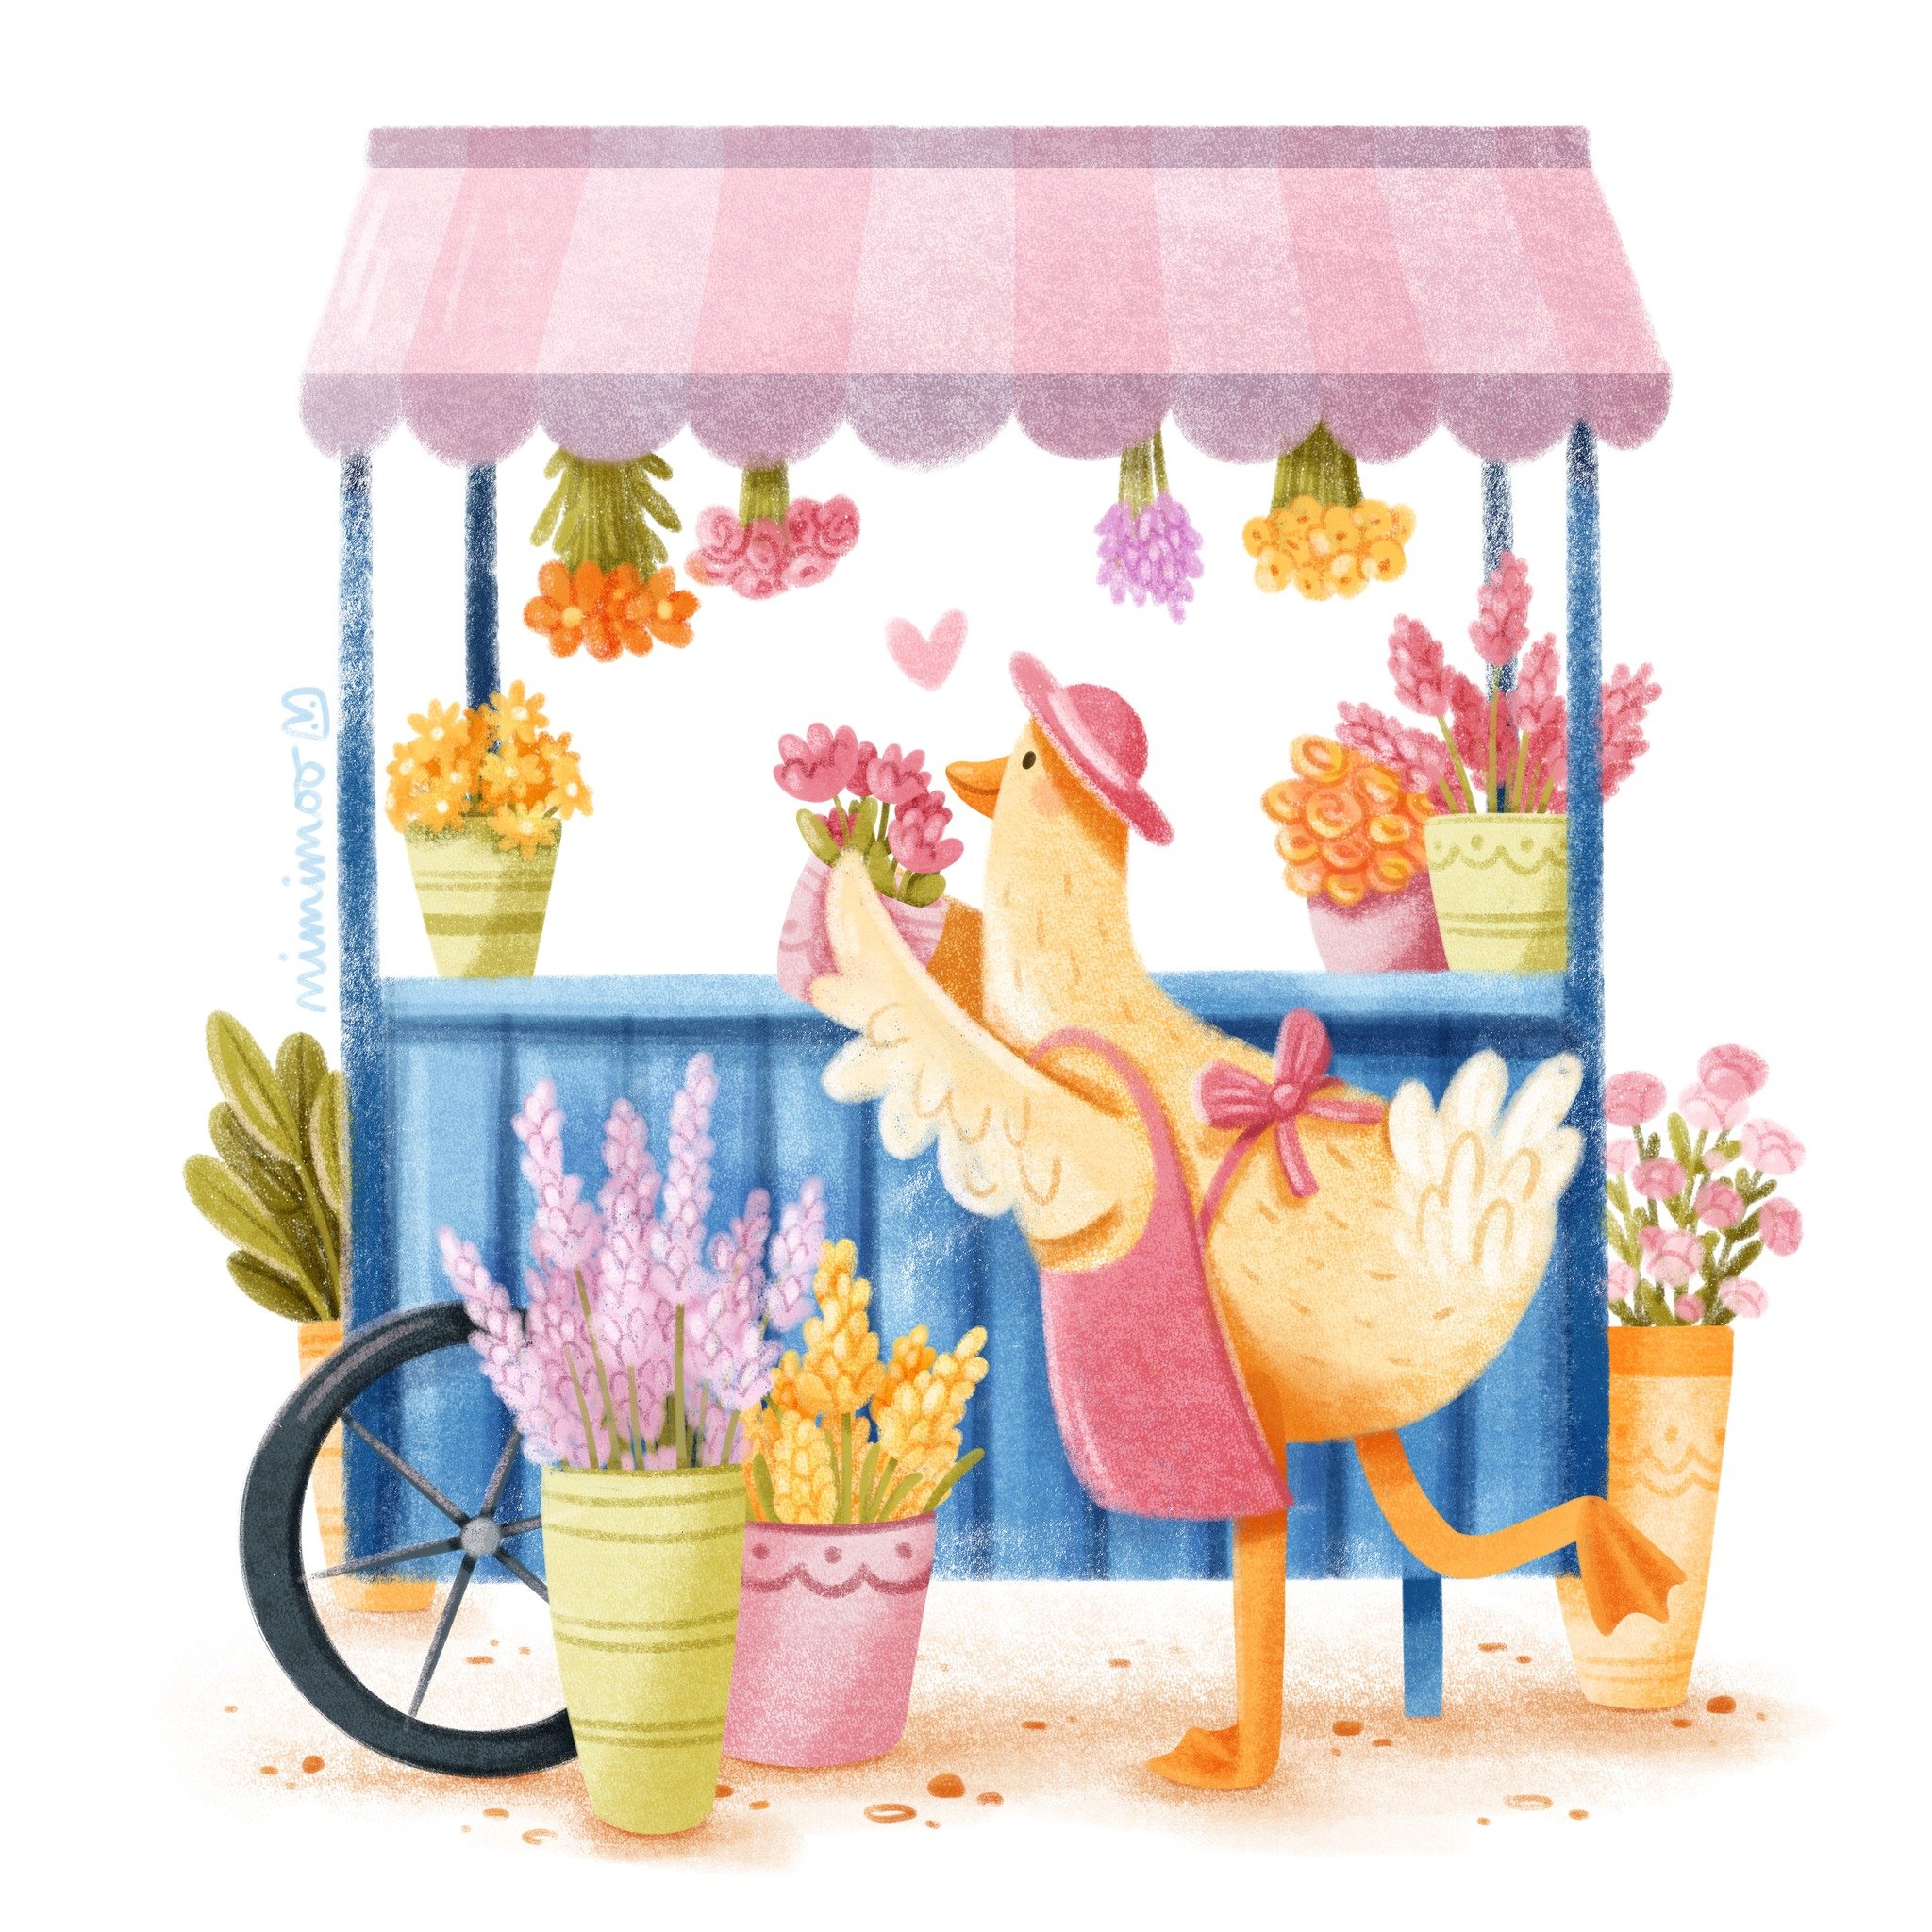 Ducky has lots of lovely flowers for sale from her garden today! 🌷🌼🌻

Have been working on this illustration on and off for a couple of weeks after my patrons voted for it in one of our polls, which is very helpful because I always have far more s